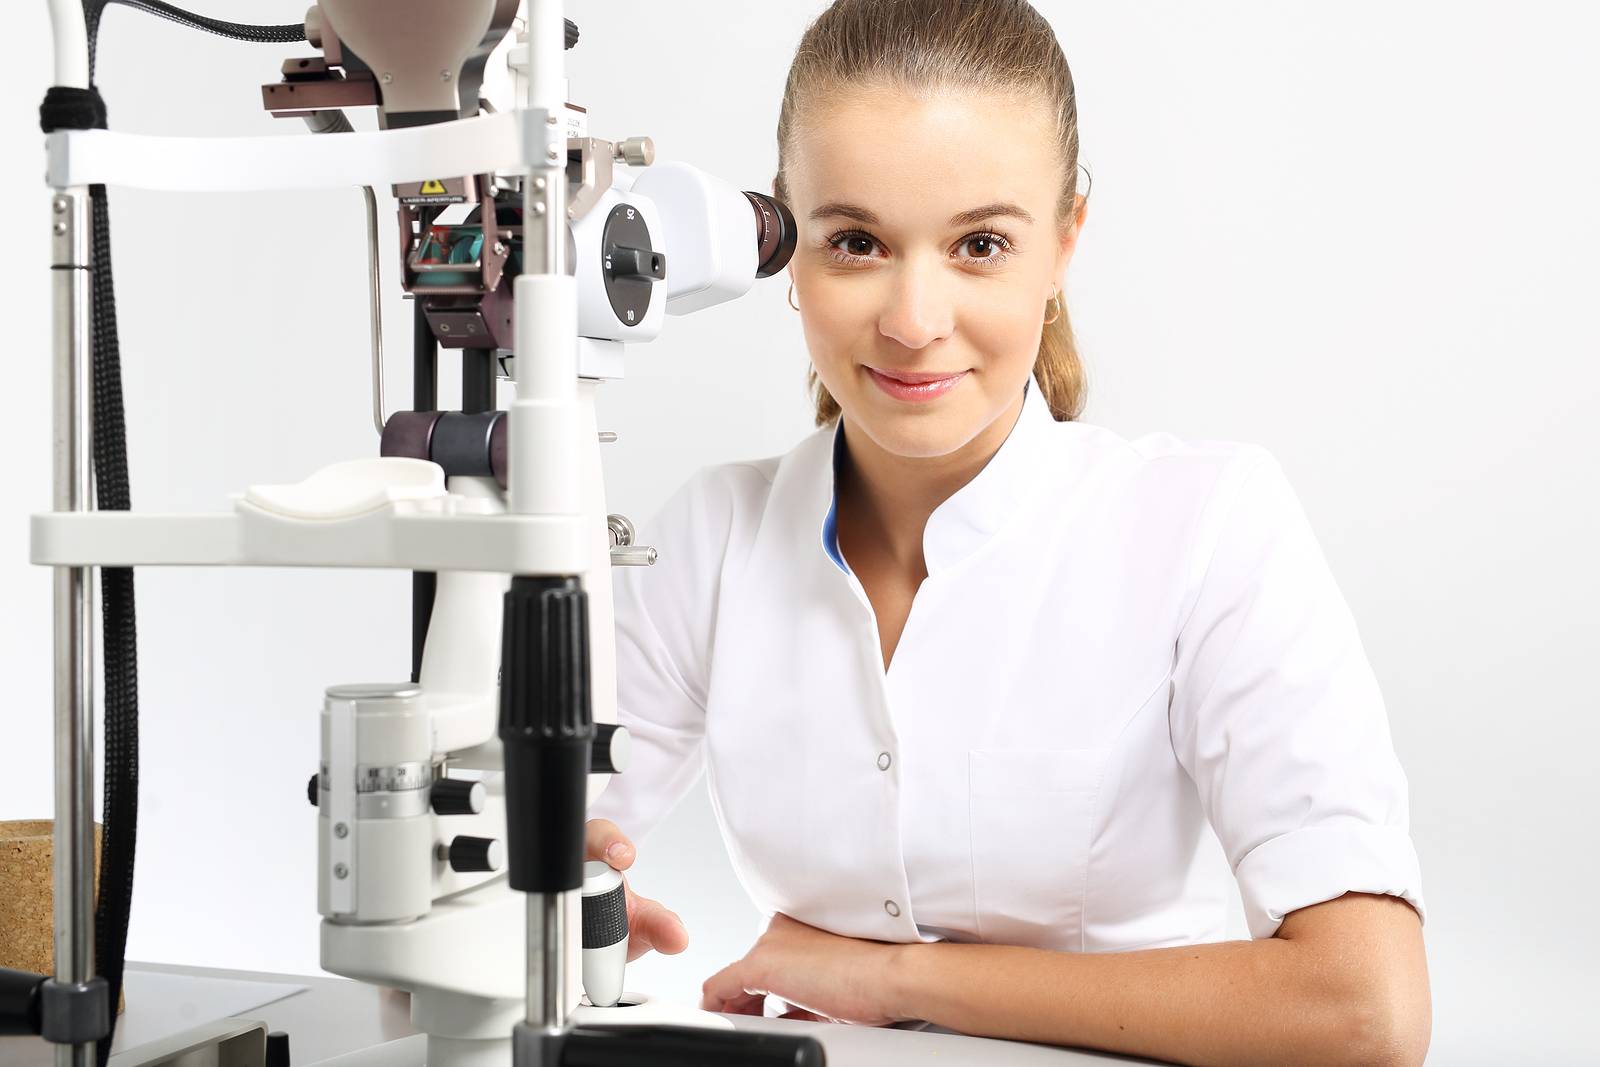 How to Find and Hire the Best OPHTHALMOLOGIST?